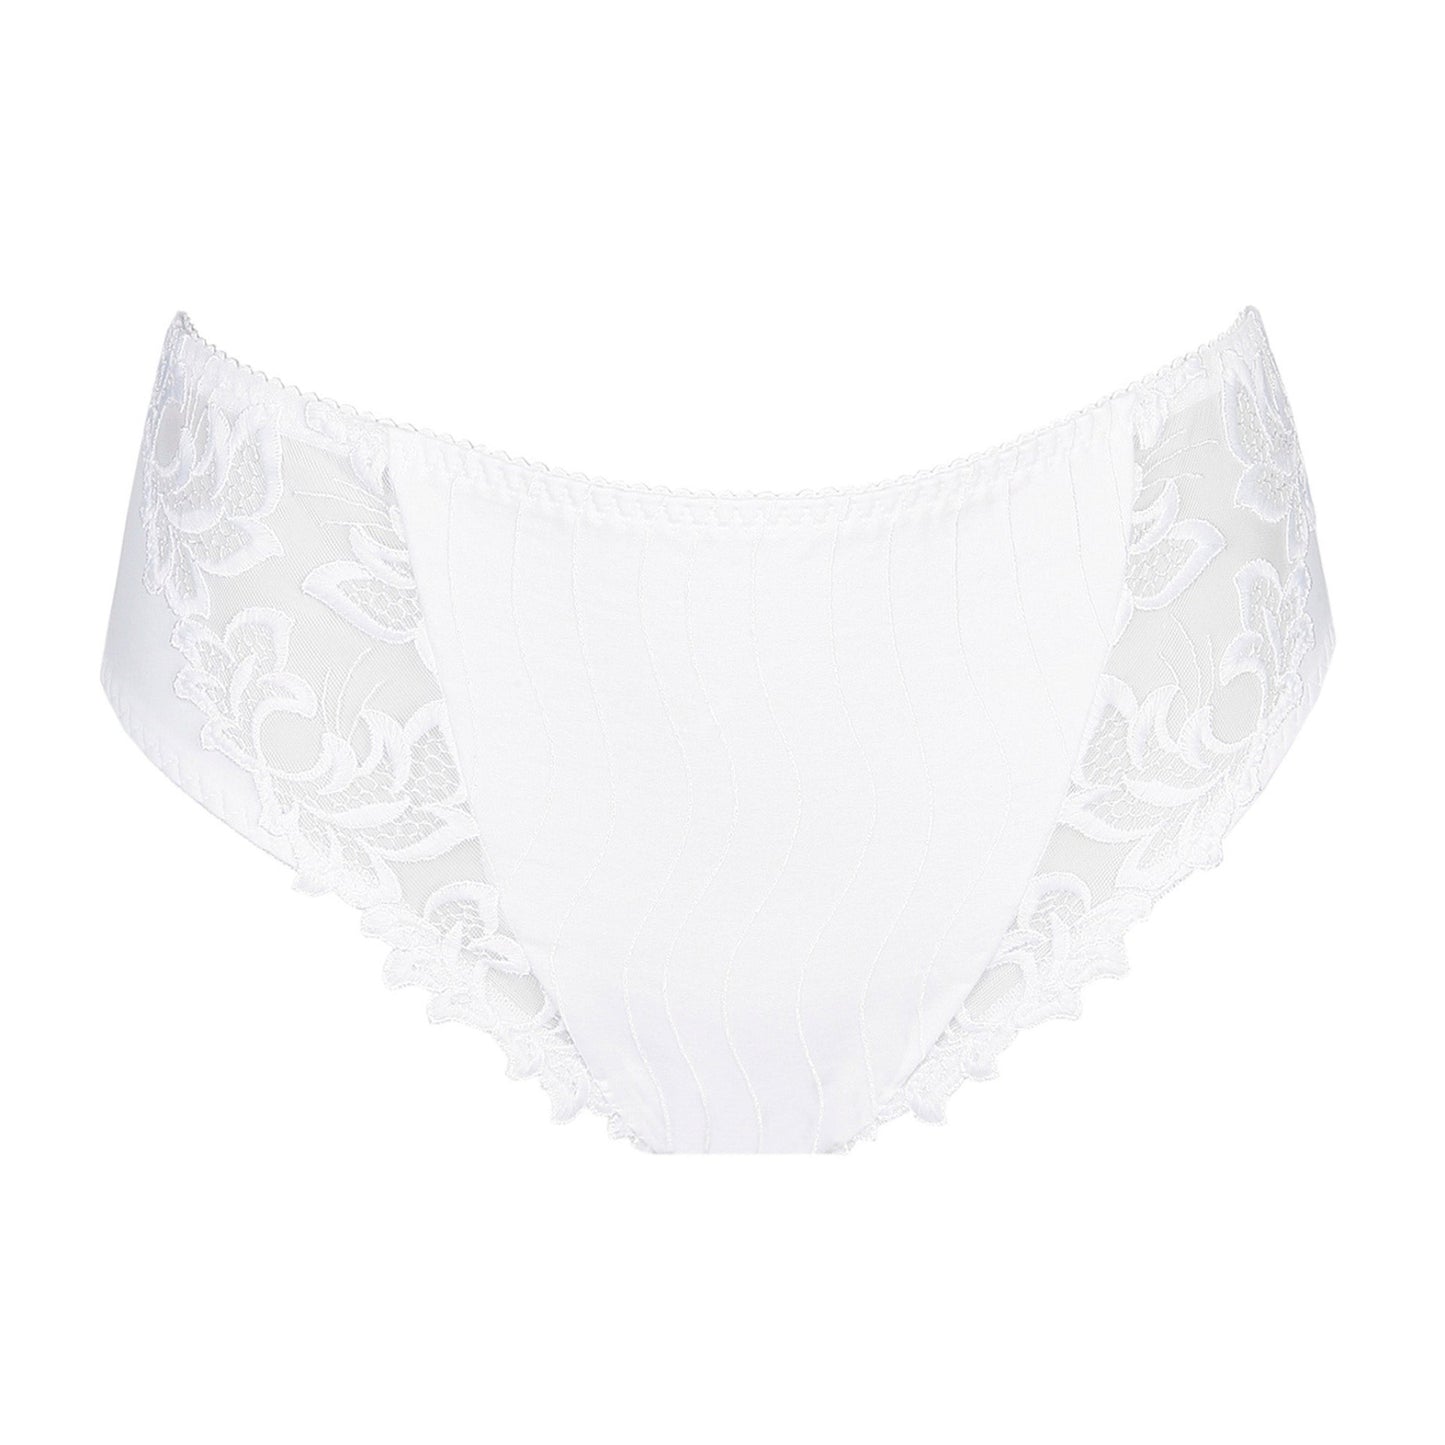 Deauville high-waisted full brief with luxurious lace in White by Primadonna.